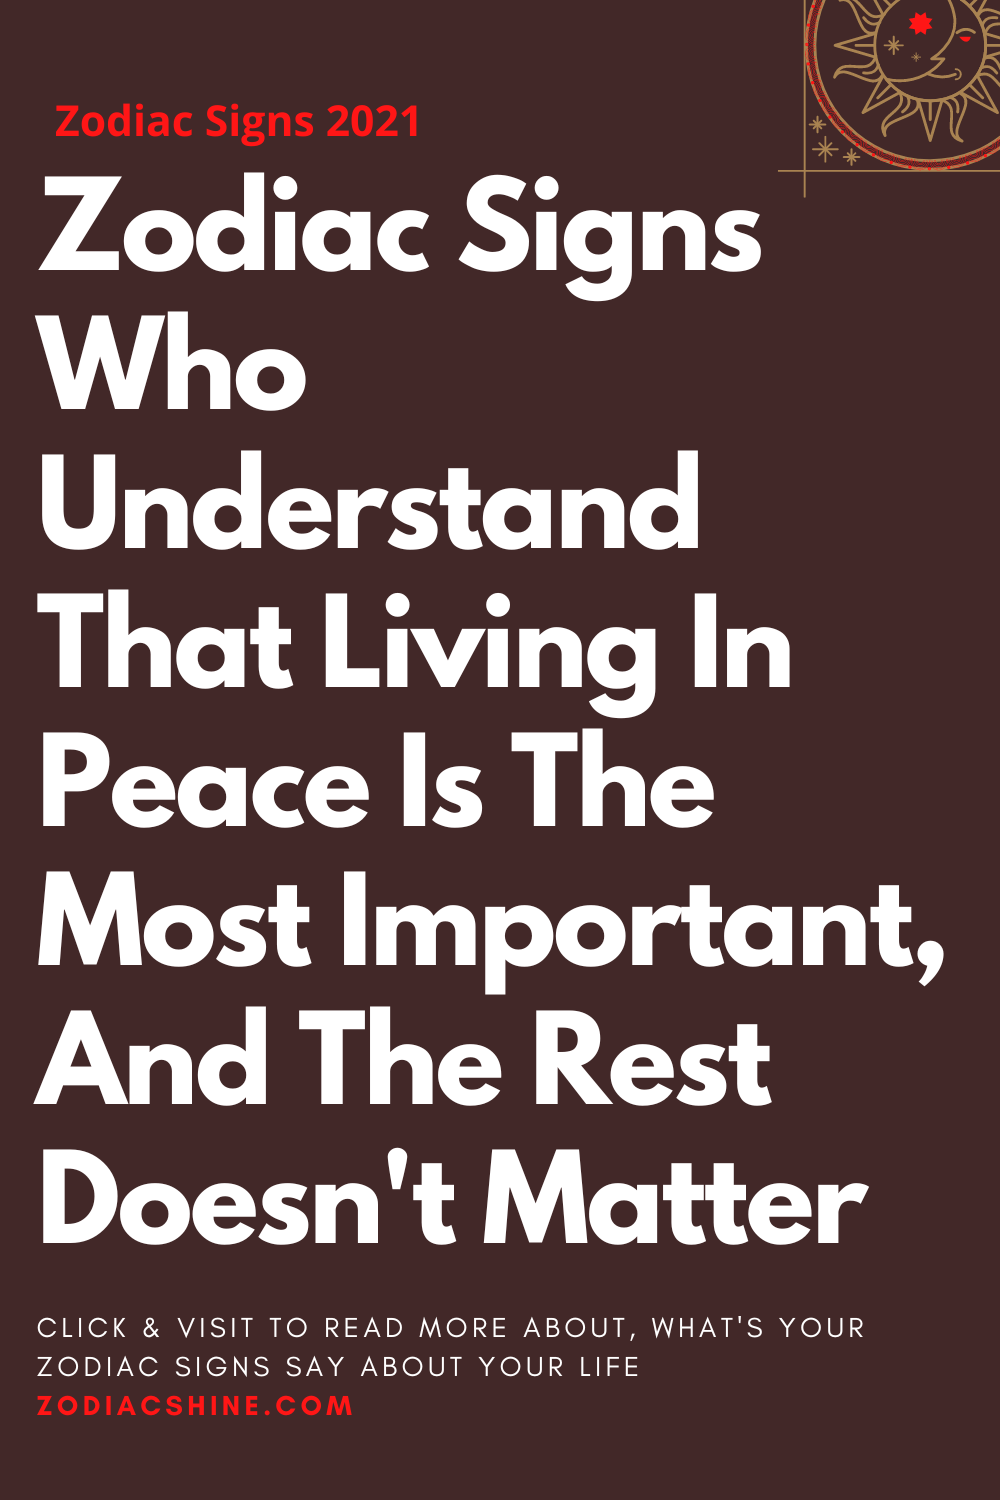 Zodiac Signs Who Understand That Living In Peace Is The Most Important, And The Rest Doesn't Matter